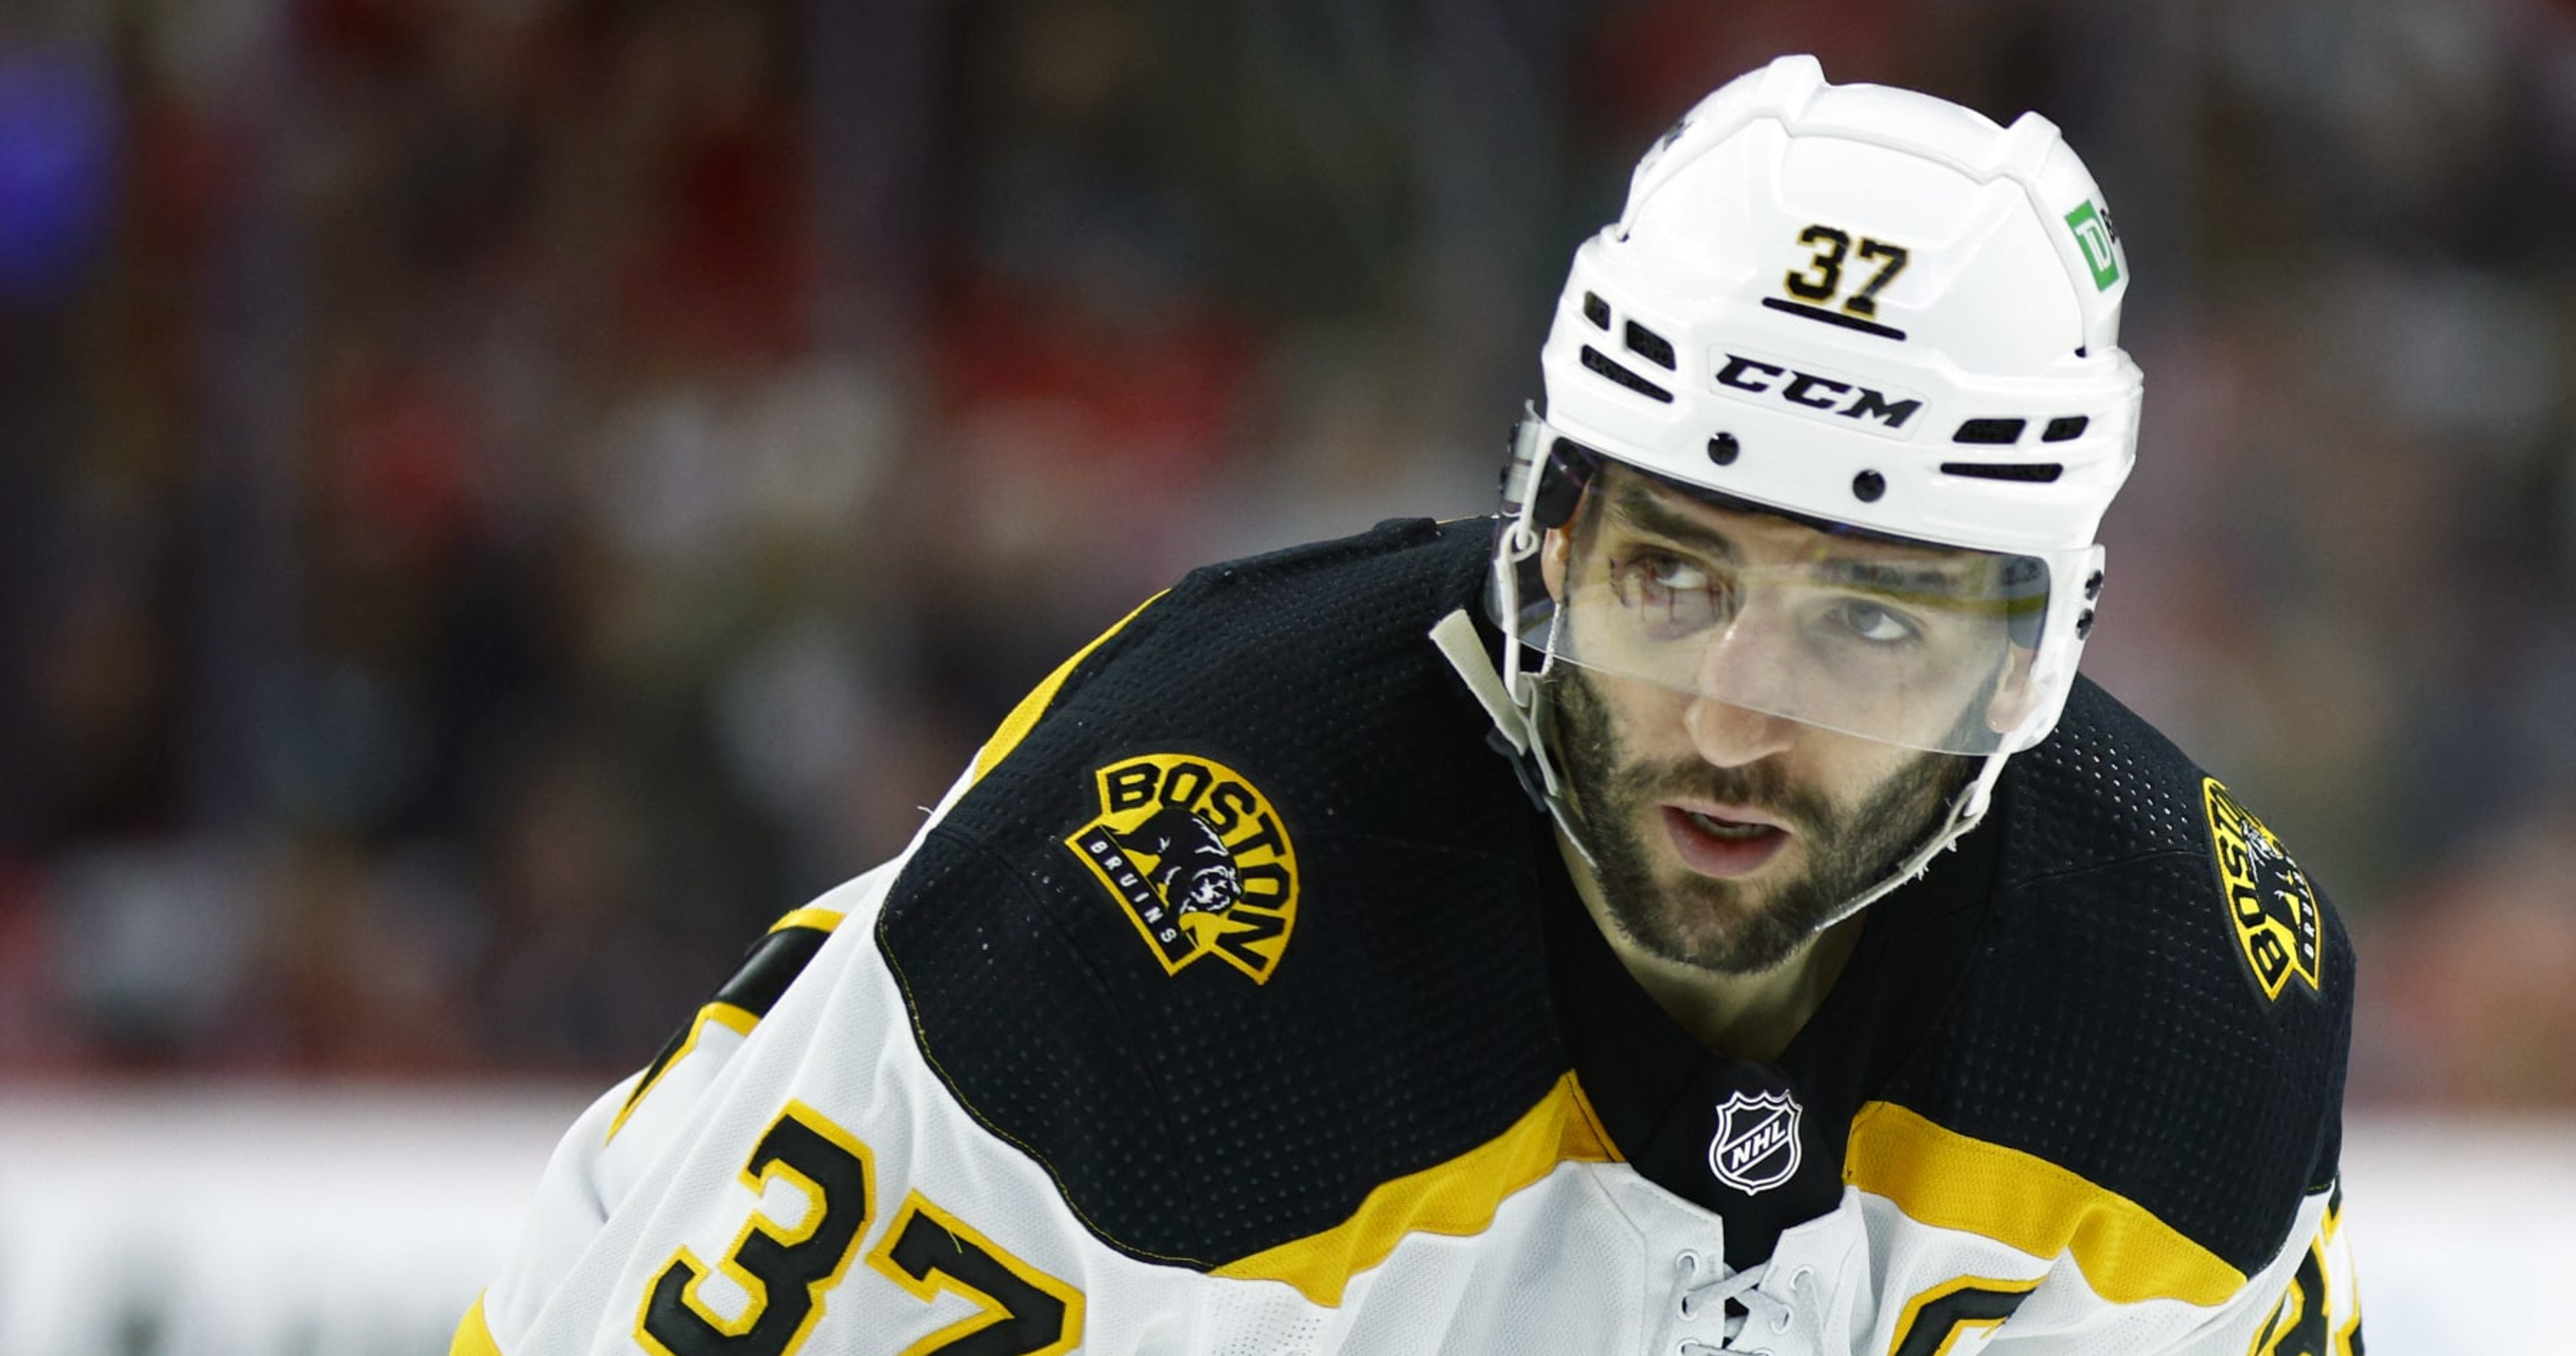 Patrice Bergeron, who won 2011 Stanley Cup with Bruins, retiring